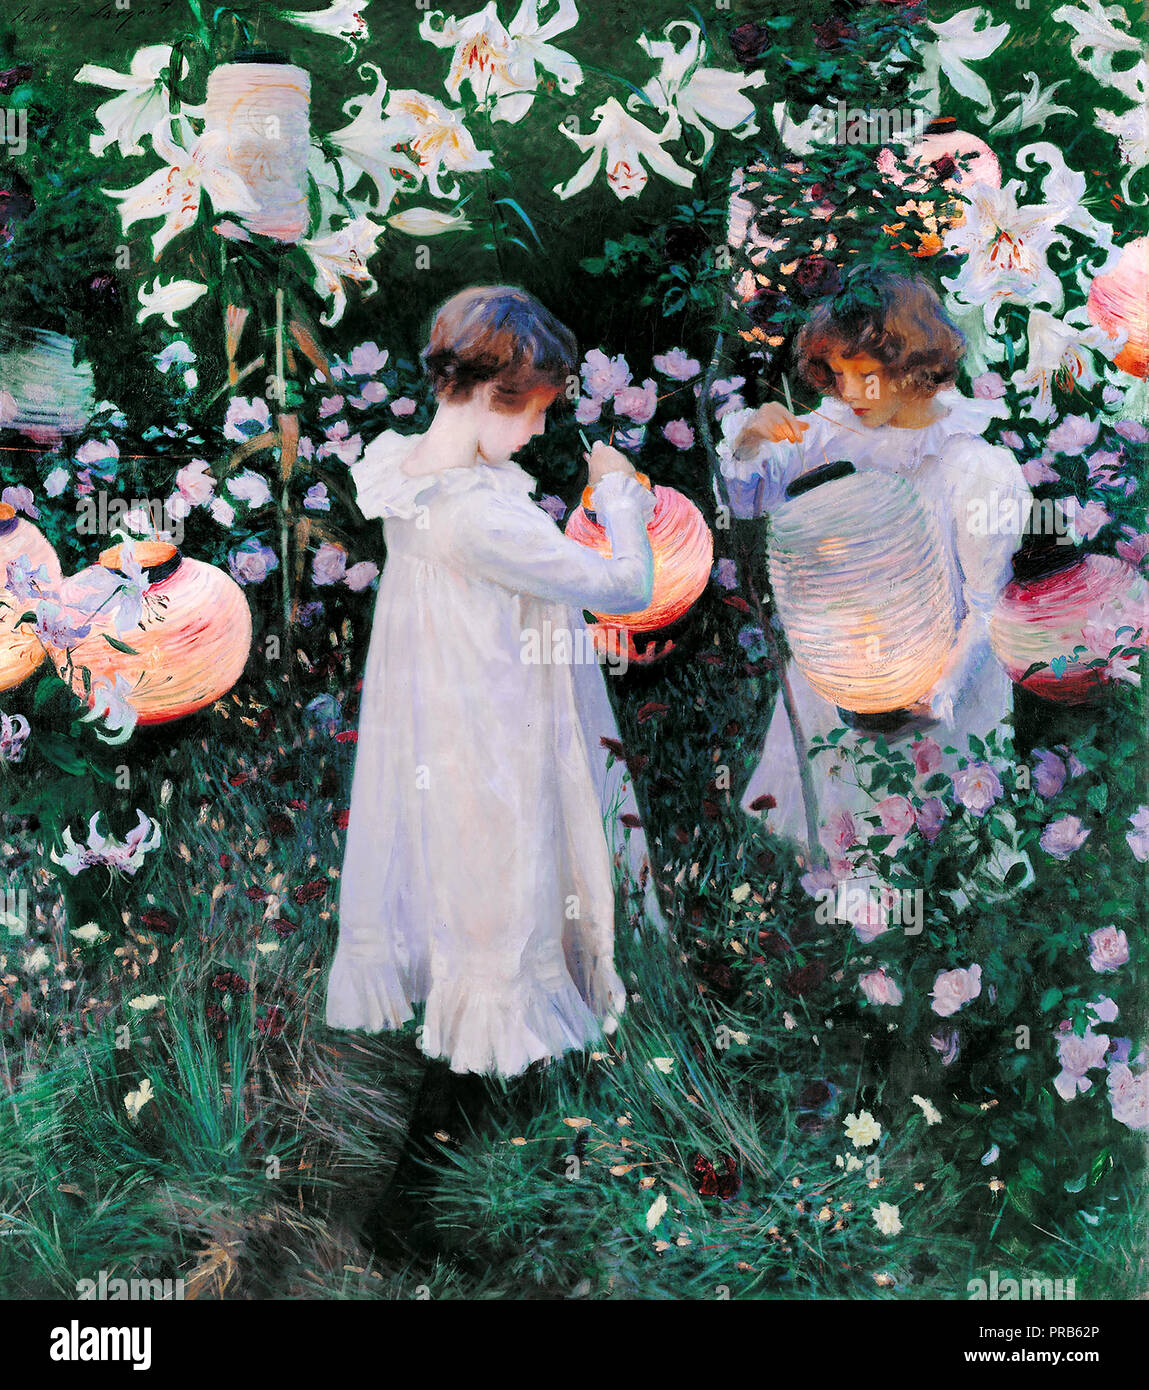 John Singer Sargent, Carnation, Lily, Lily, Rose, Circa 1885, Oil on canvas, Tate Britain, London, England. Stock Photo